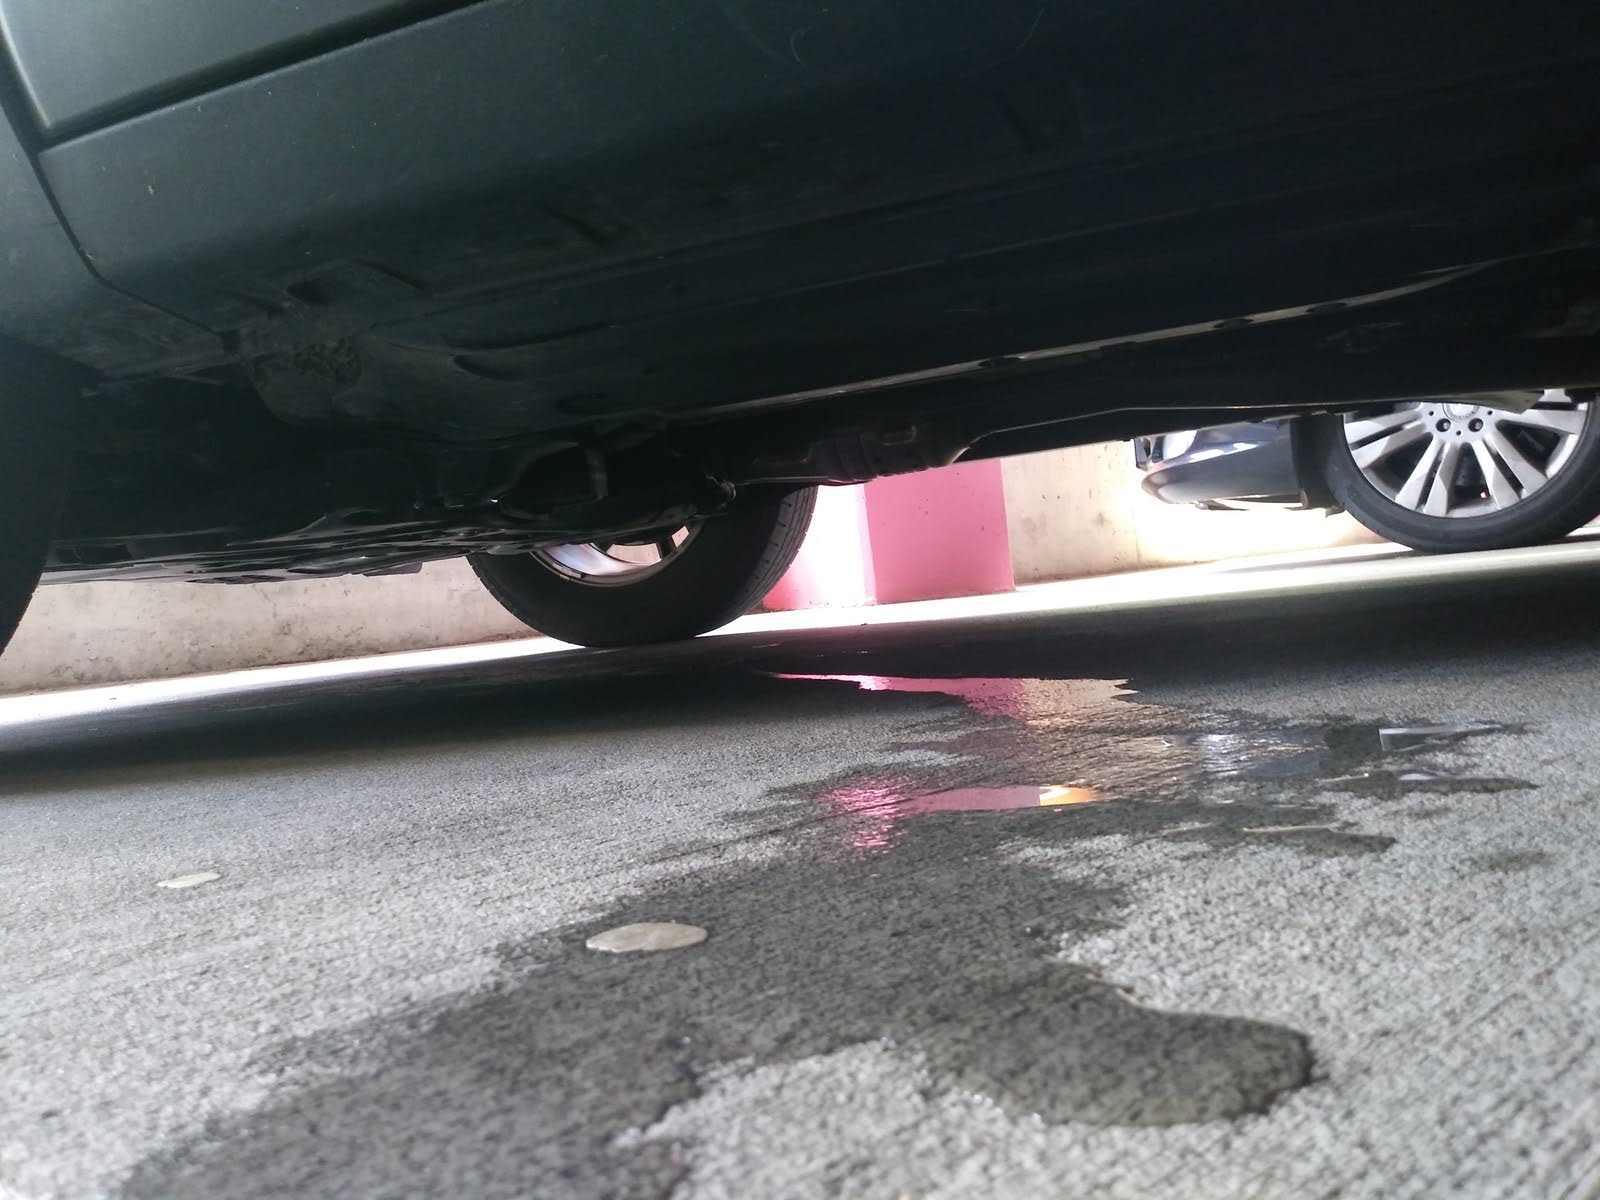 Kia Sorento Questions Leaking Fluid From Underneath The Engine At The Front Cargurus